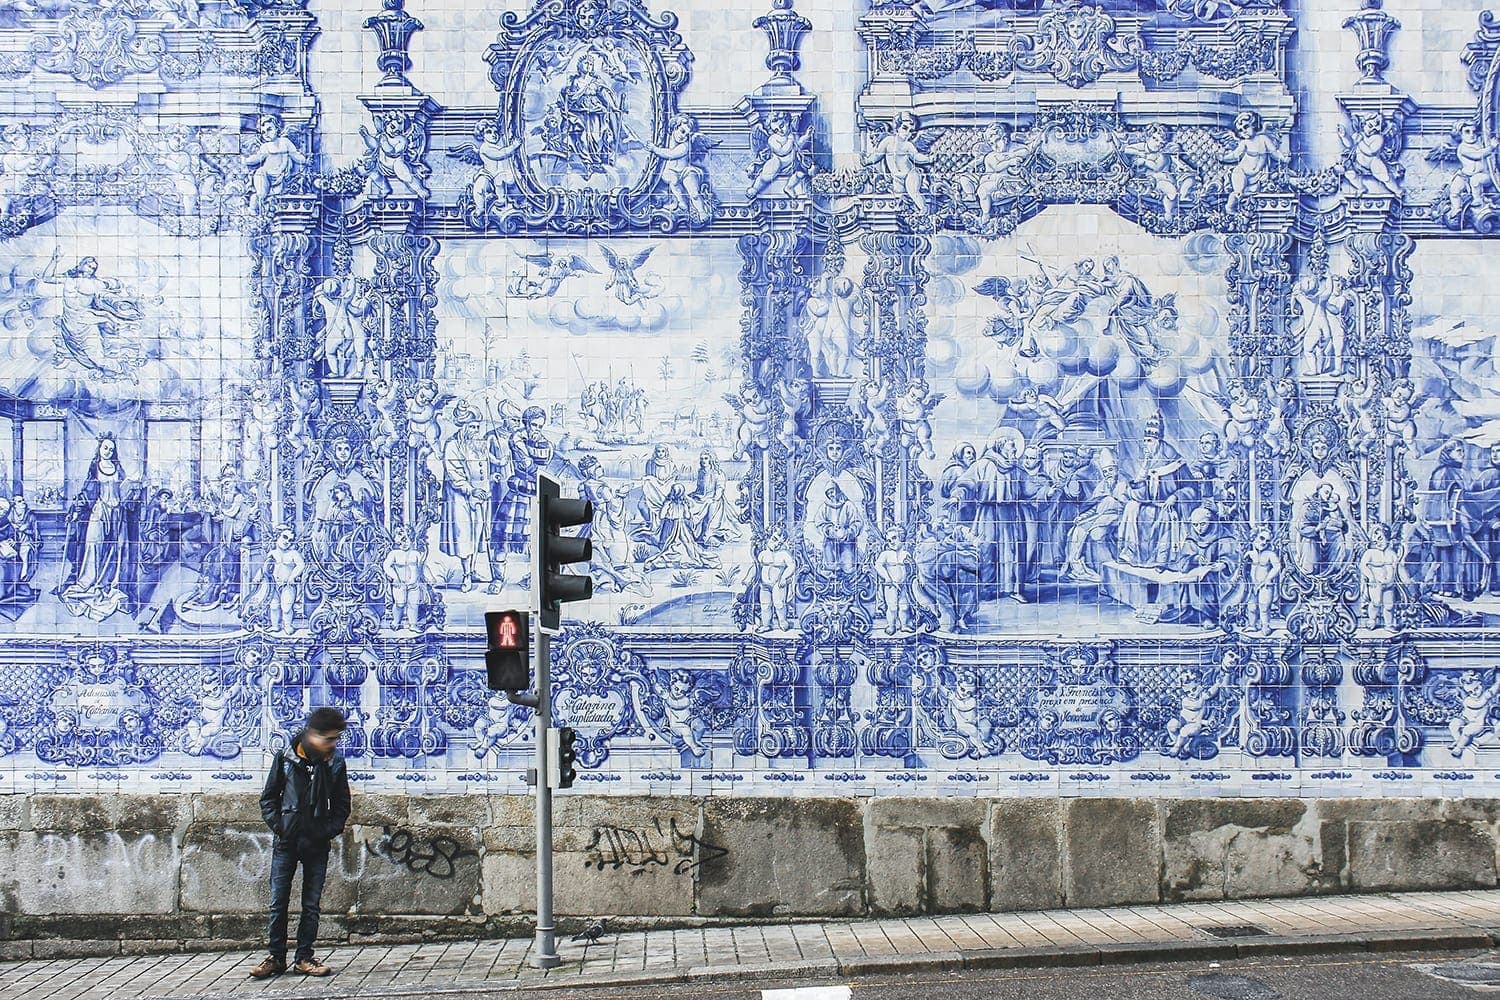 Facade of the "Chapel of Souls" in Santa Catarina, Porto, filled with historical and cultural blue and white tiles